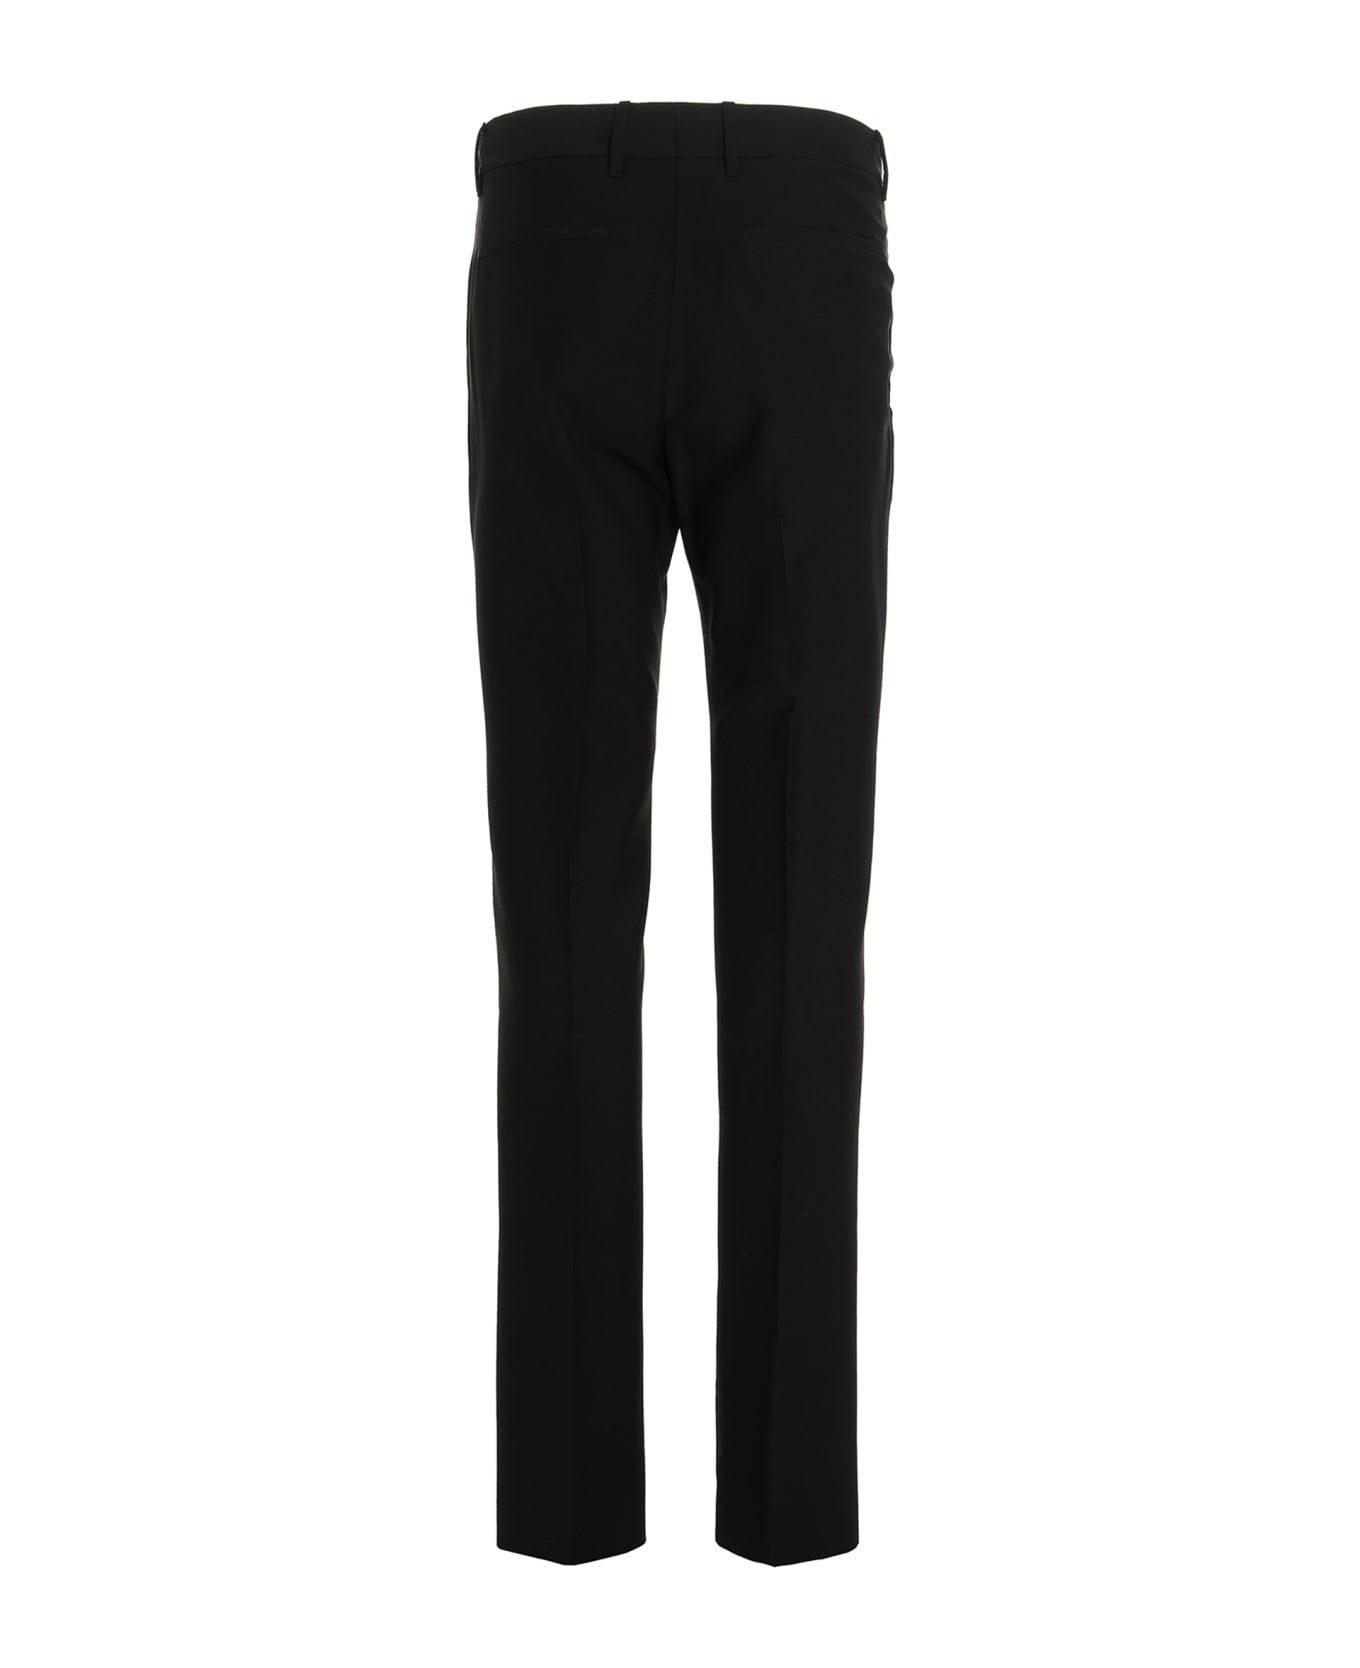 Givenchy Mohair Wool Pants - Nero